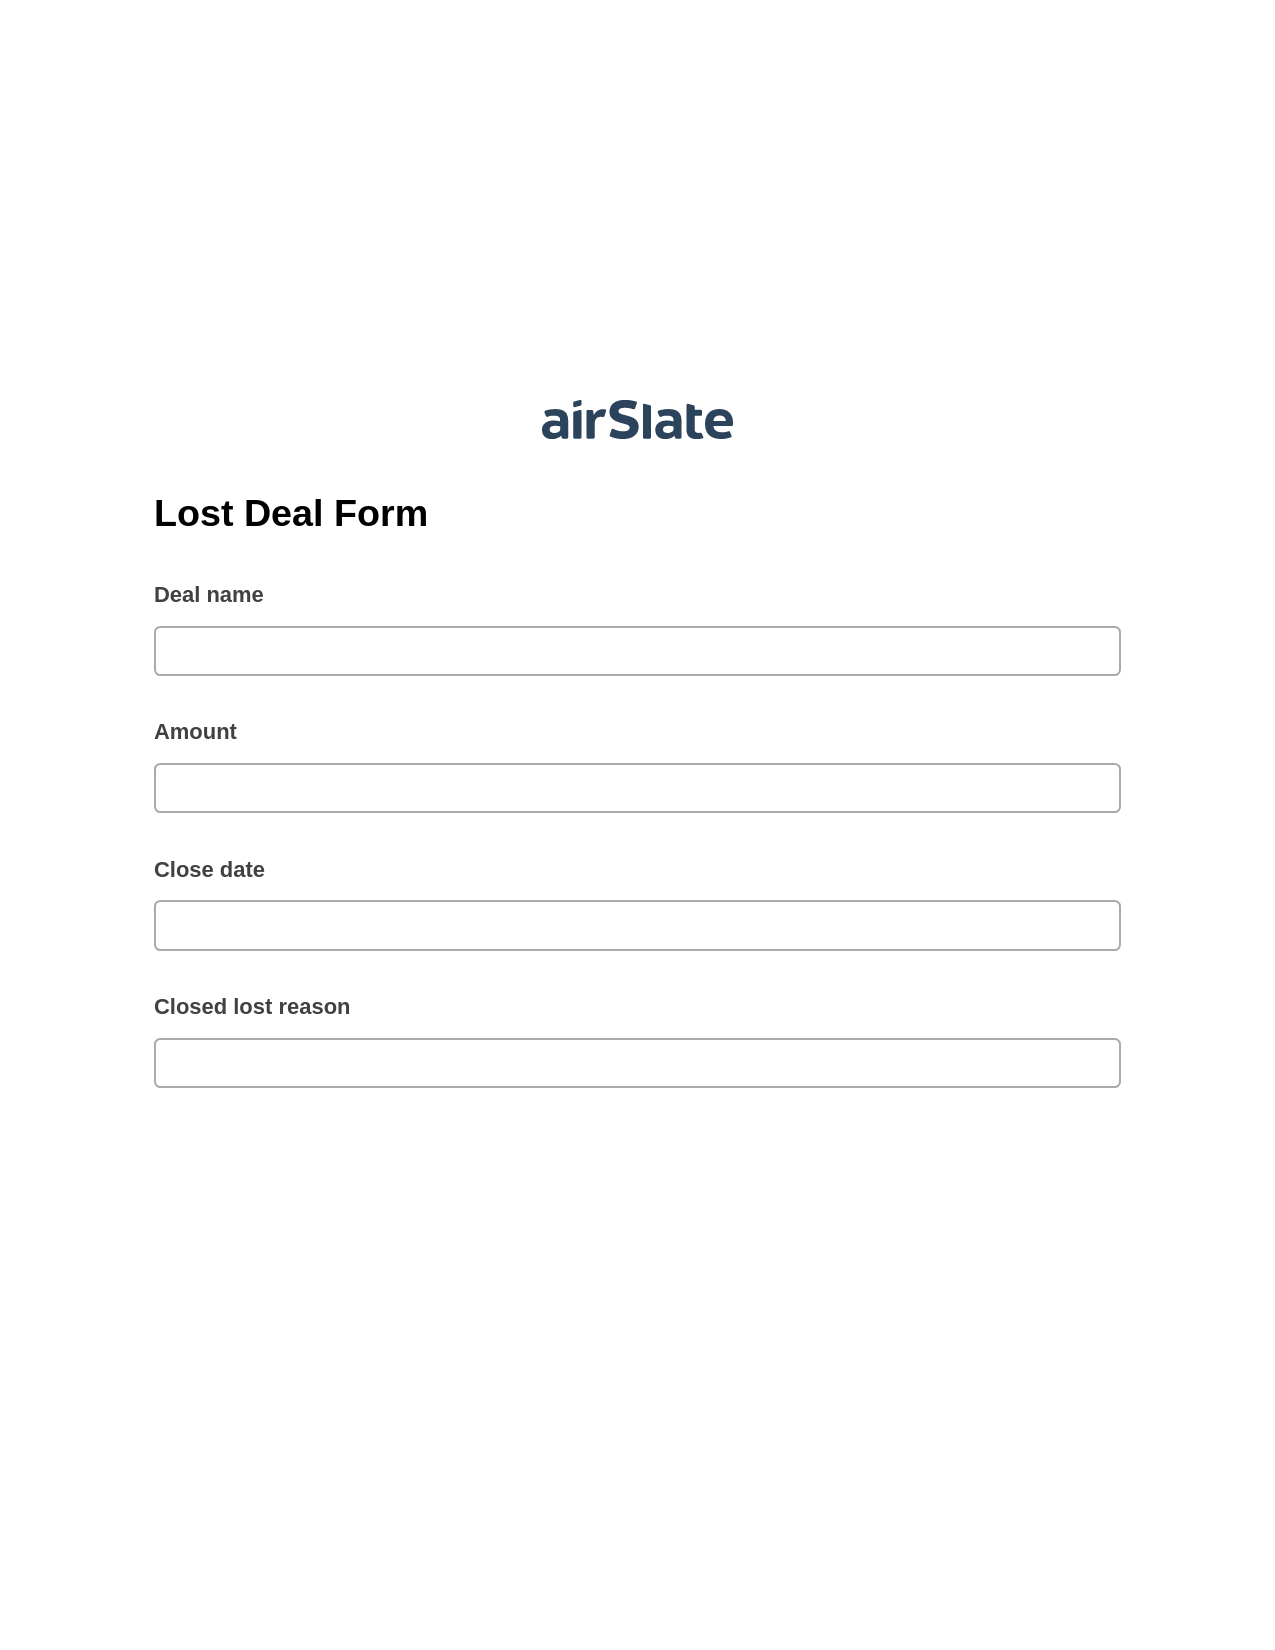 Multirole Lost Deal Form Pre-fill from Salesforce Records with SOQL Bot, Reminder Bot, Archive to SharePoint Folder Bot